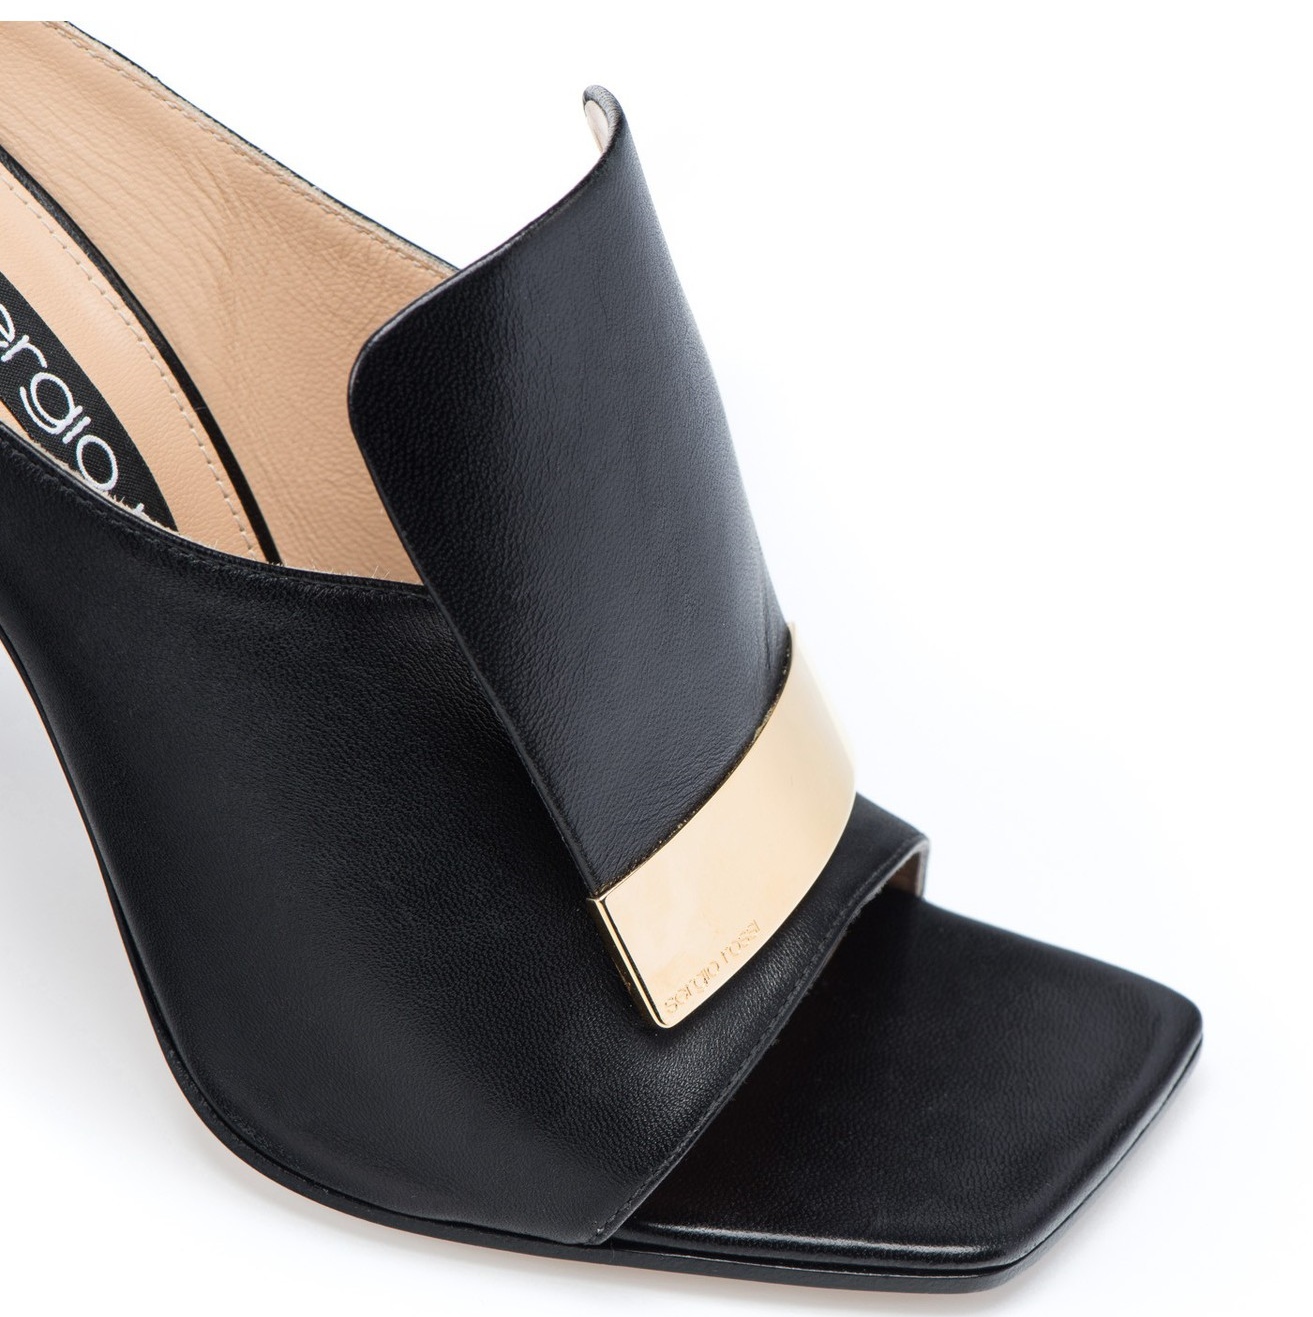 Shoe of the Day | Sergio Rossi SR1 Sabot Mules | SHOEOGRAPHY